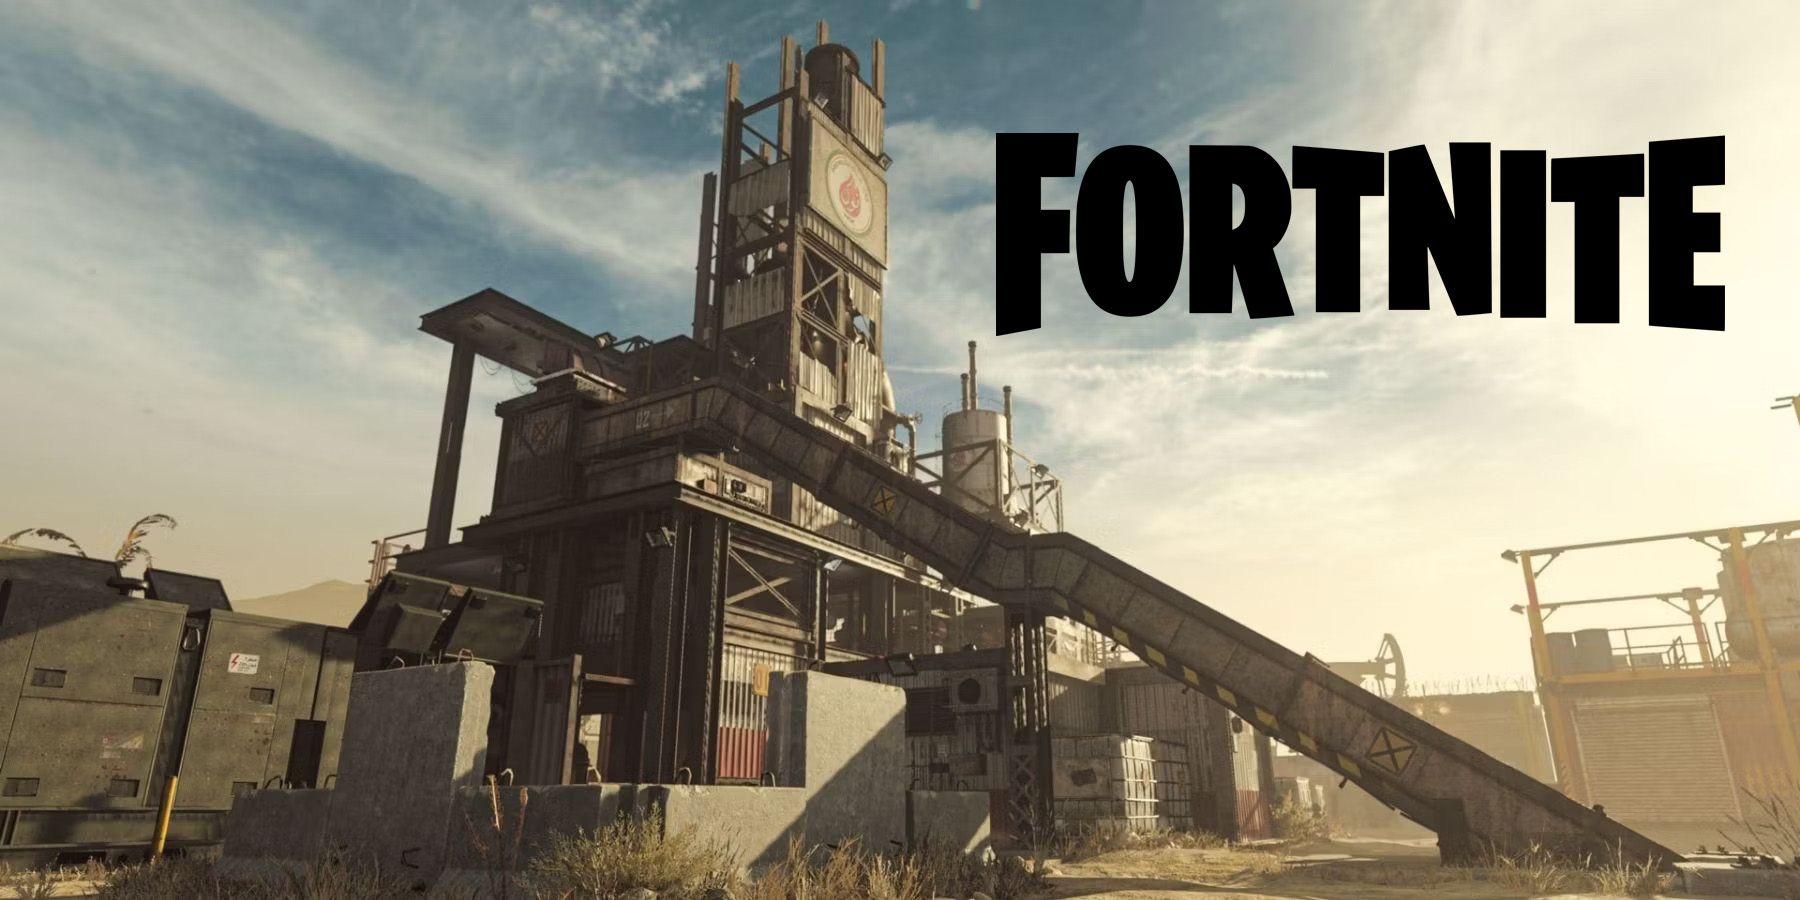 Activision Has Started Issuing DMCAs for Fortnite Creative 2.0 Call of Duty-Themed Maps